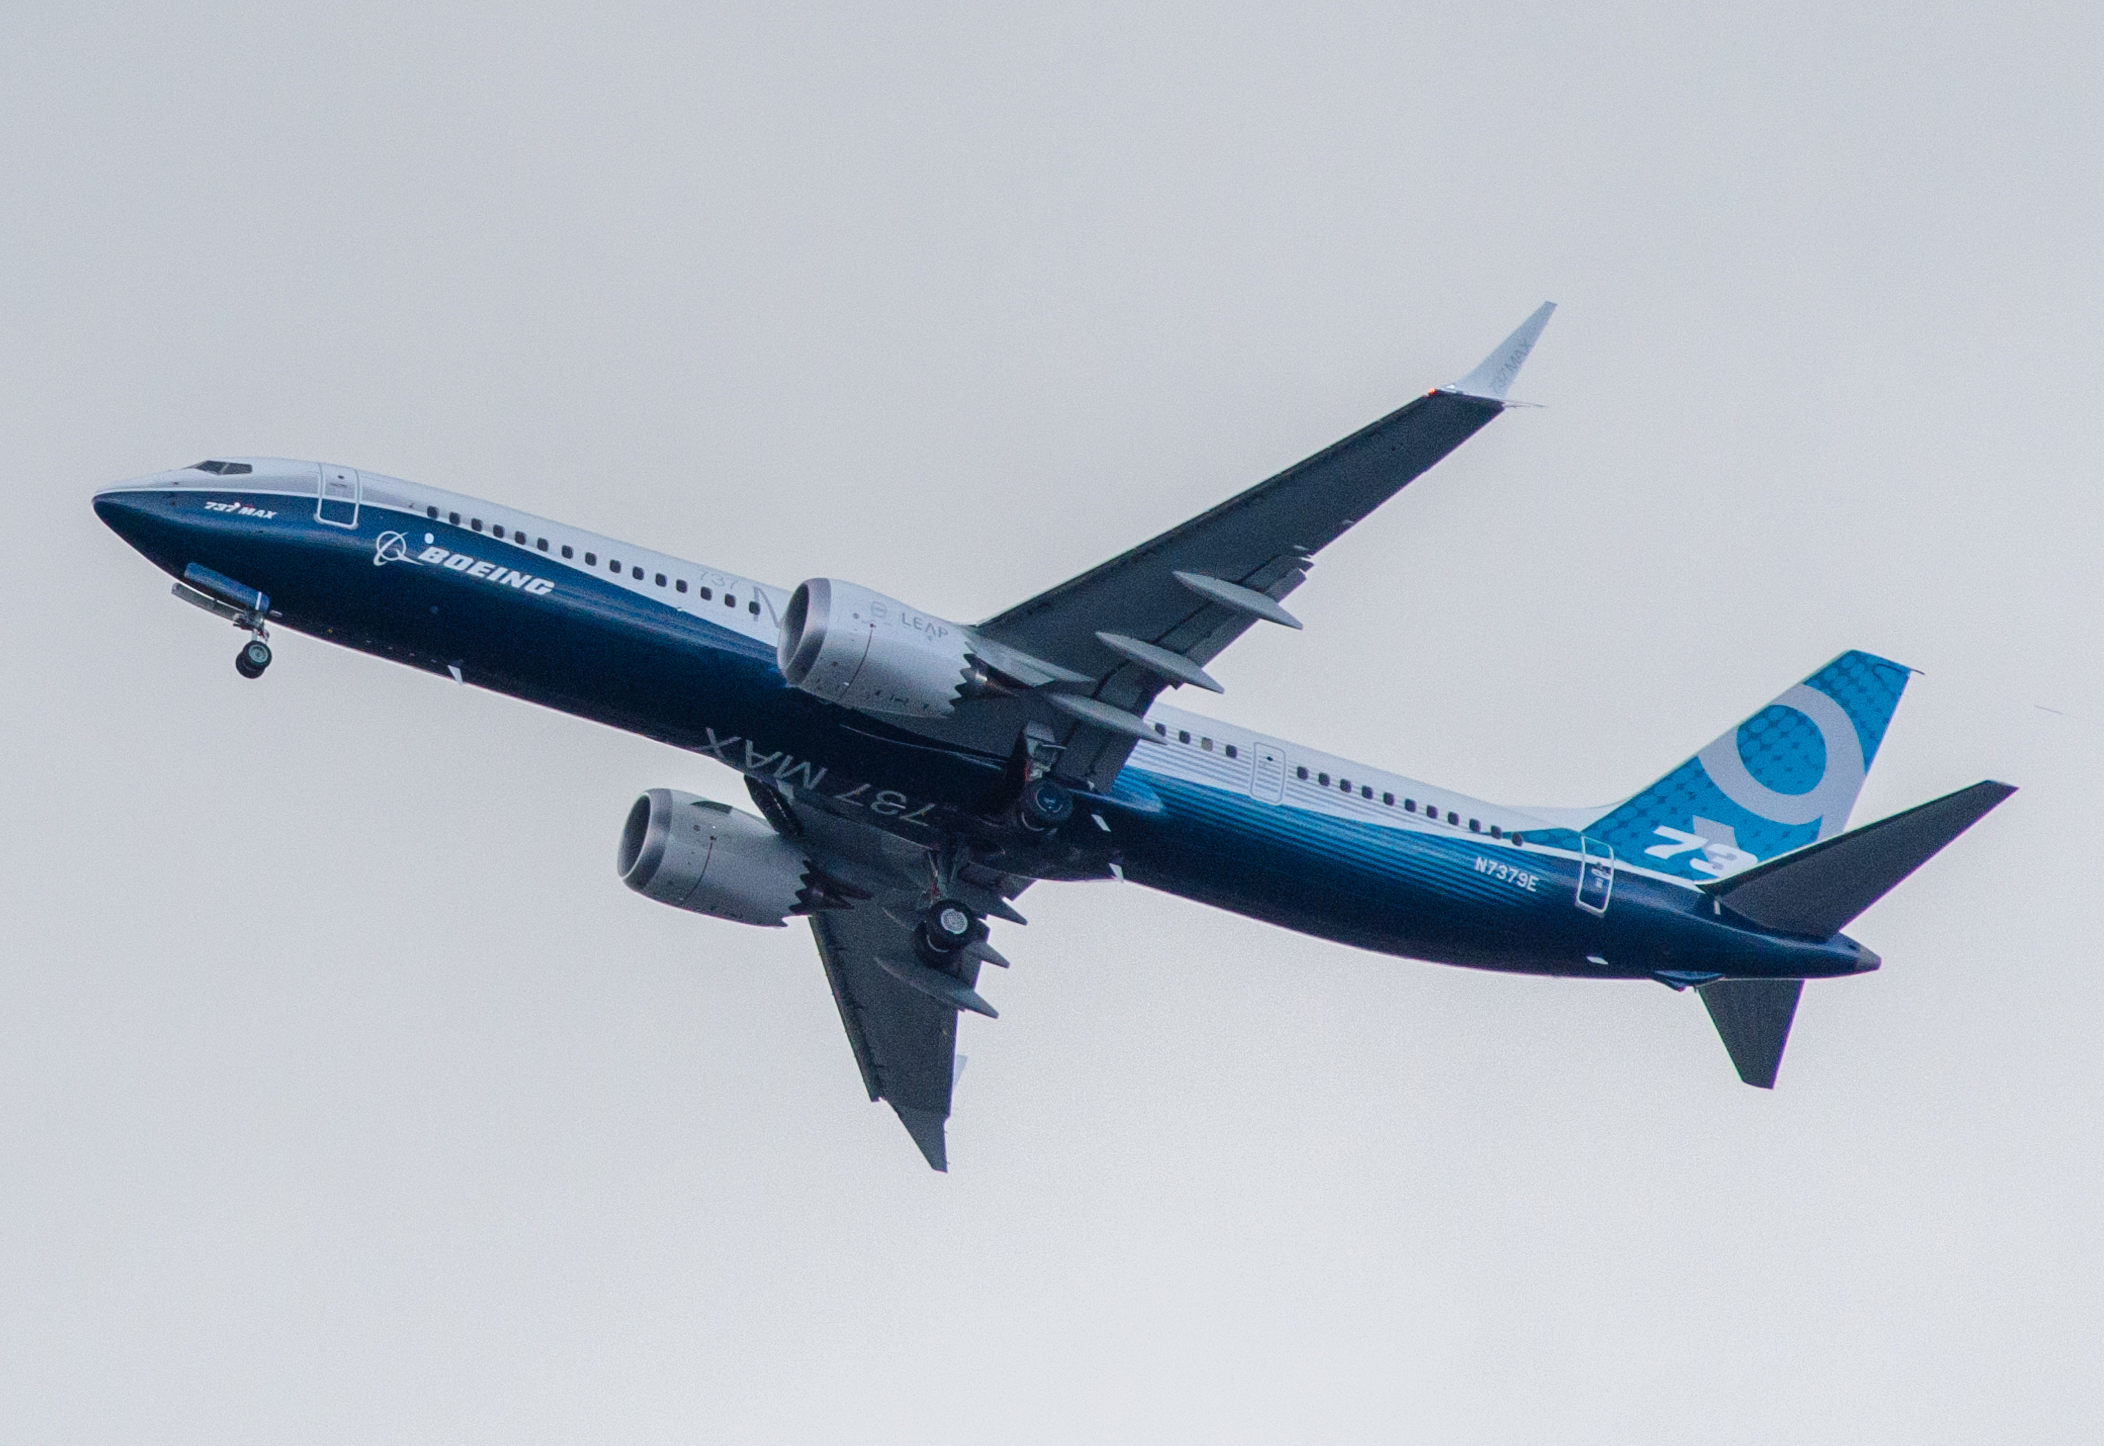 Boeing will not cancel CEO incentive award tied to 737 MAX return